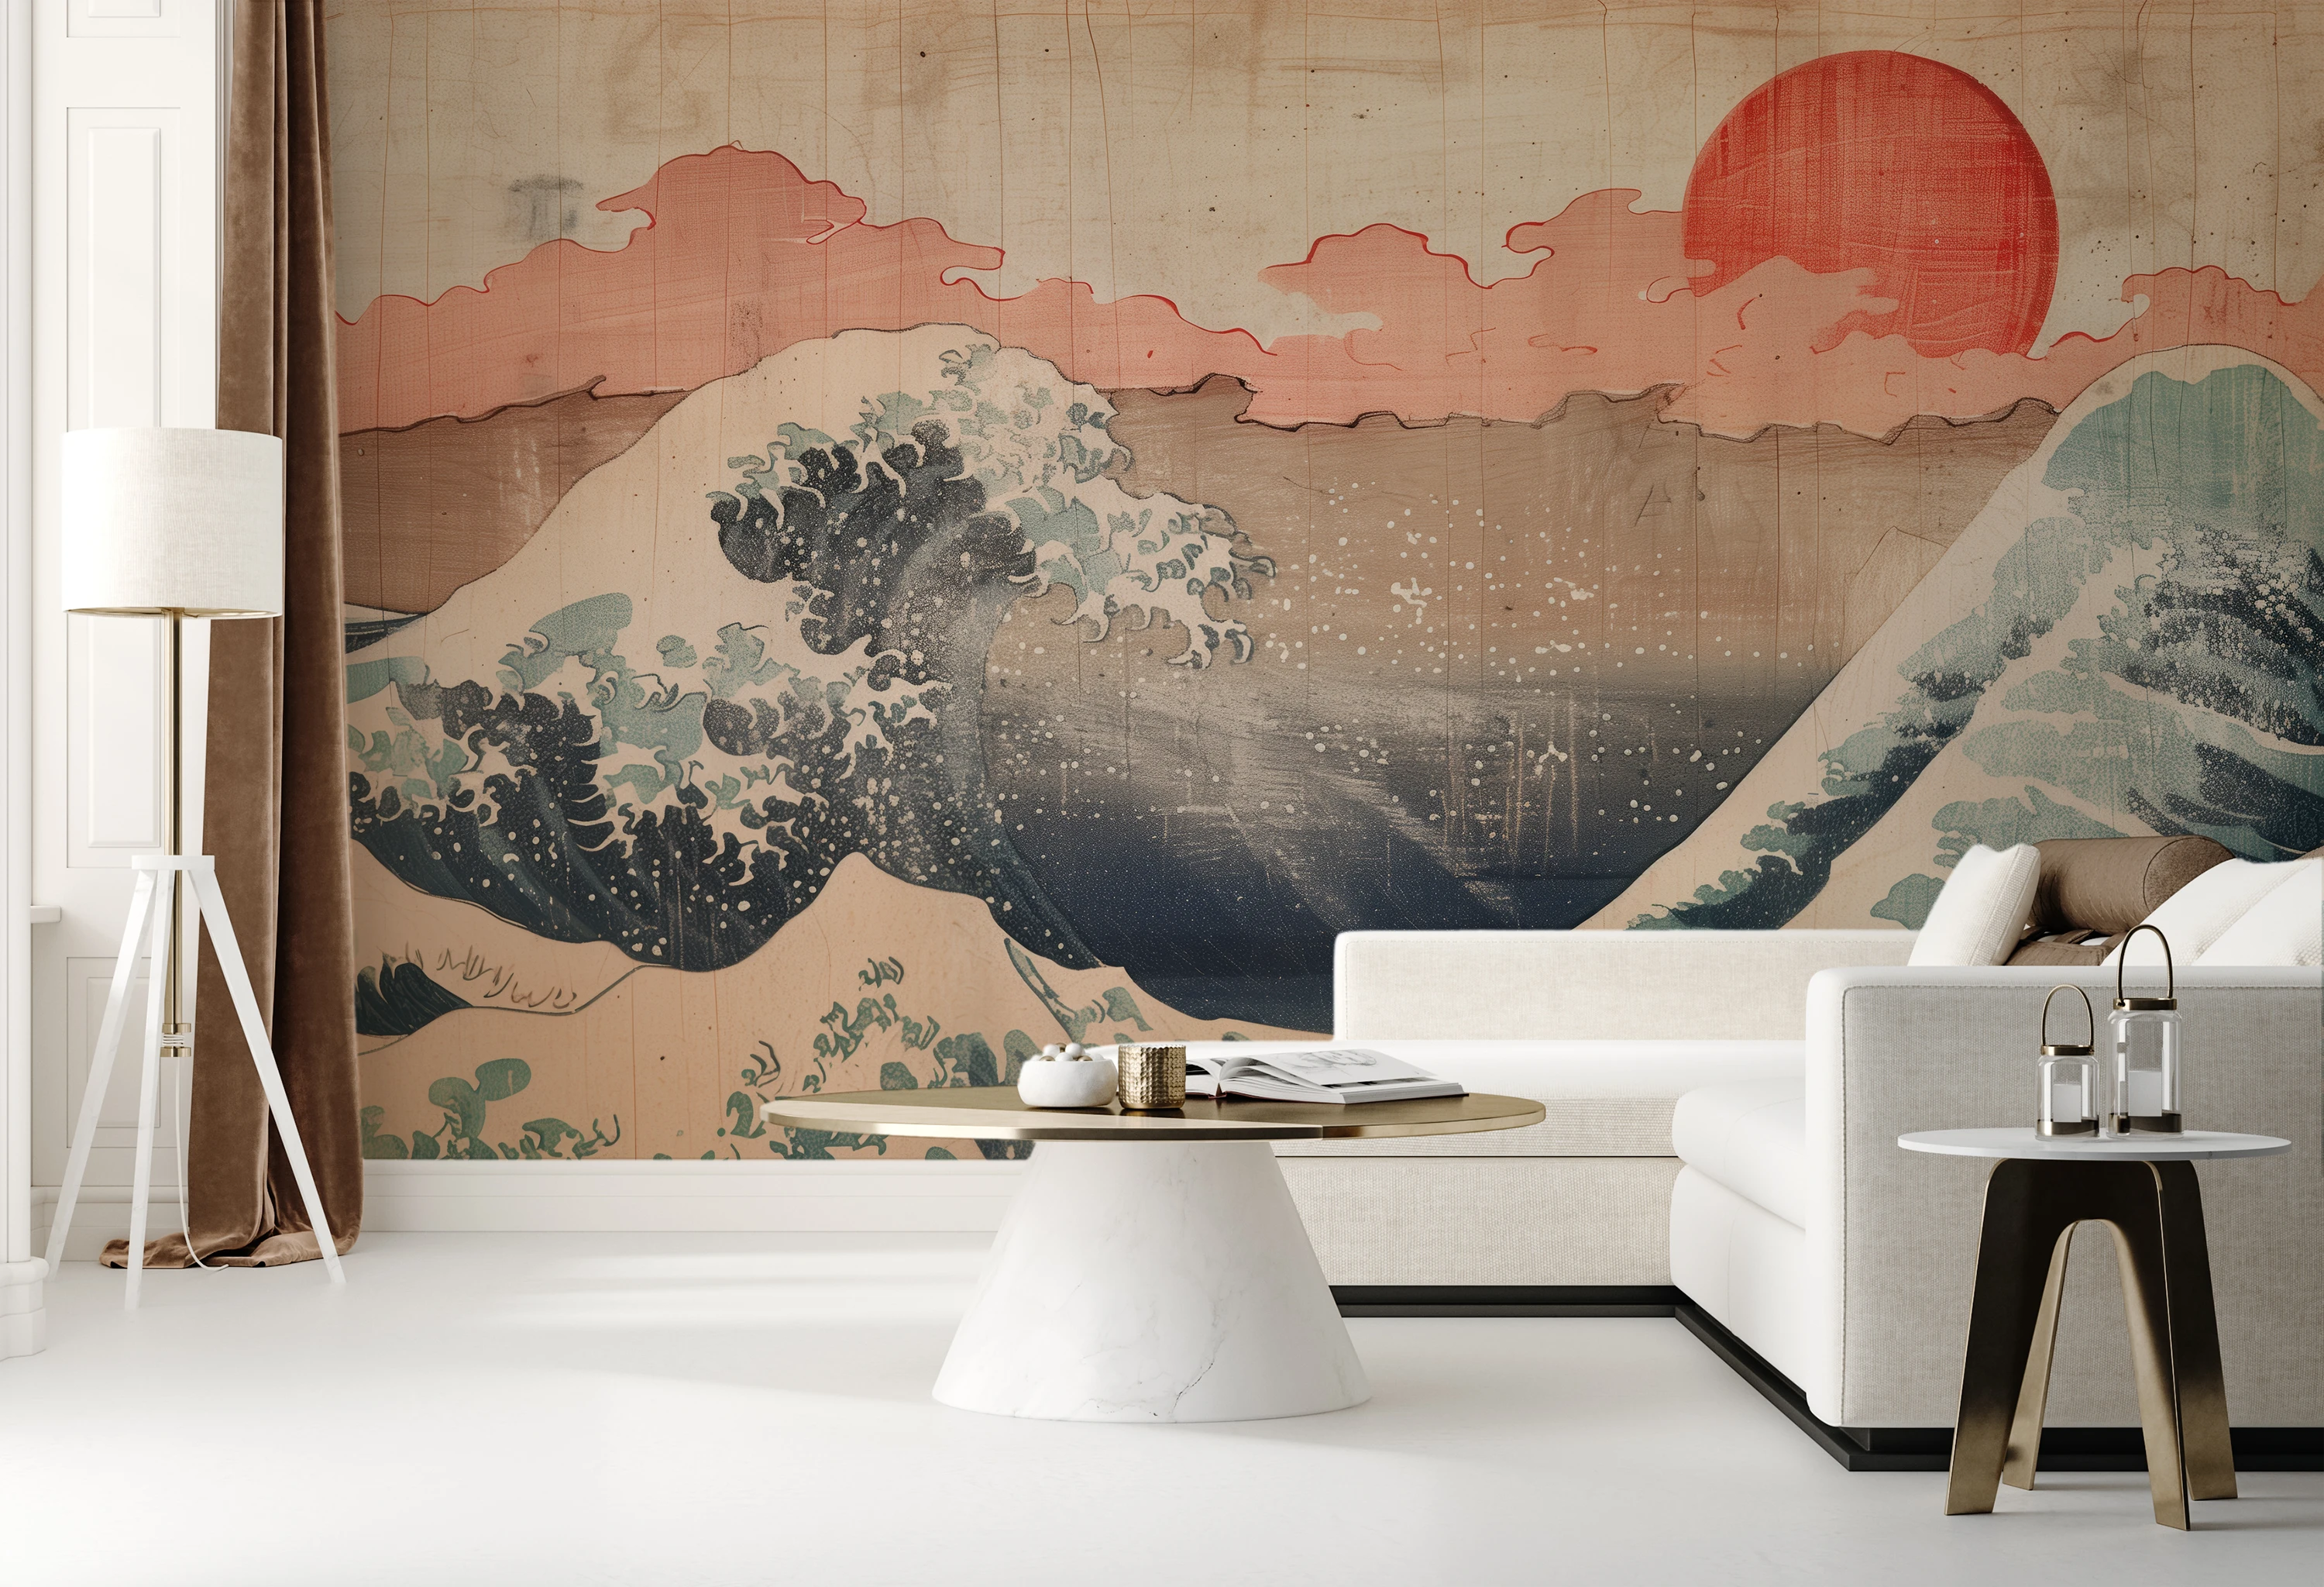 One of the Decomura photo wallpaper patterns from the "Japan Sea" collection